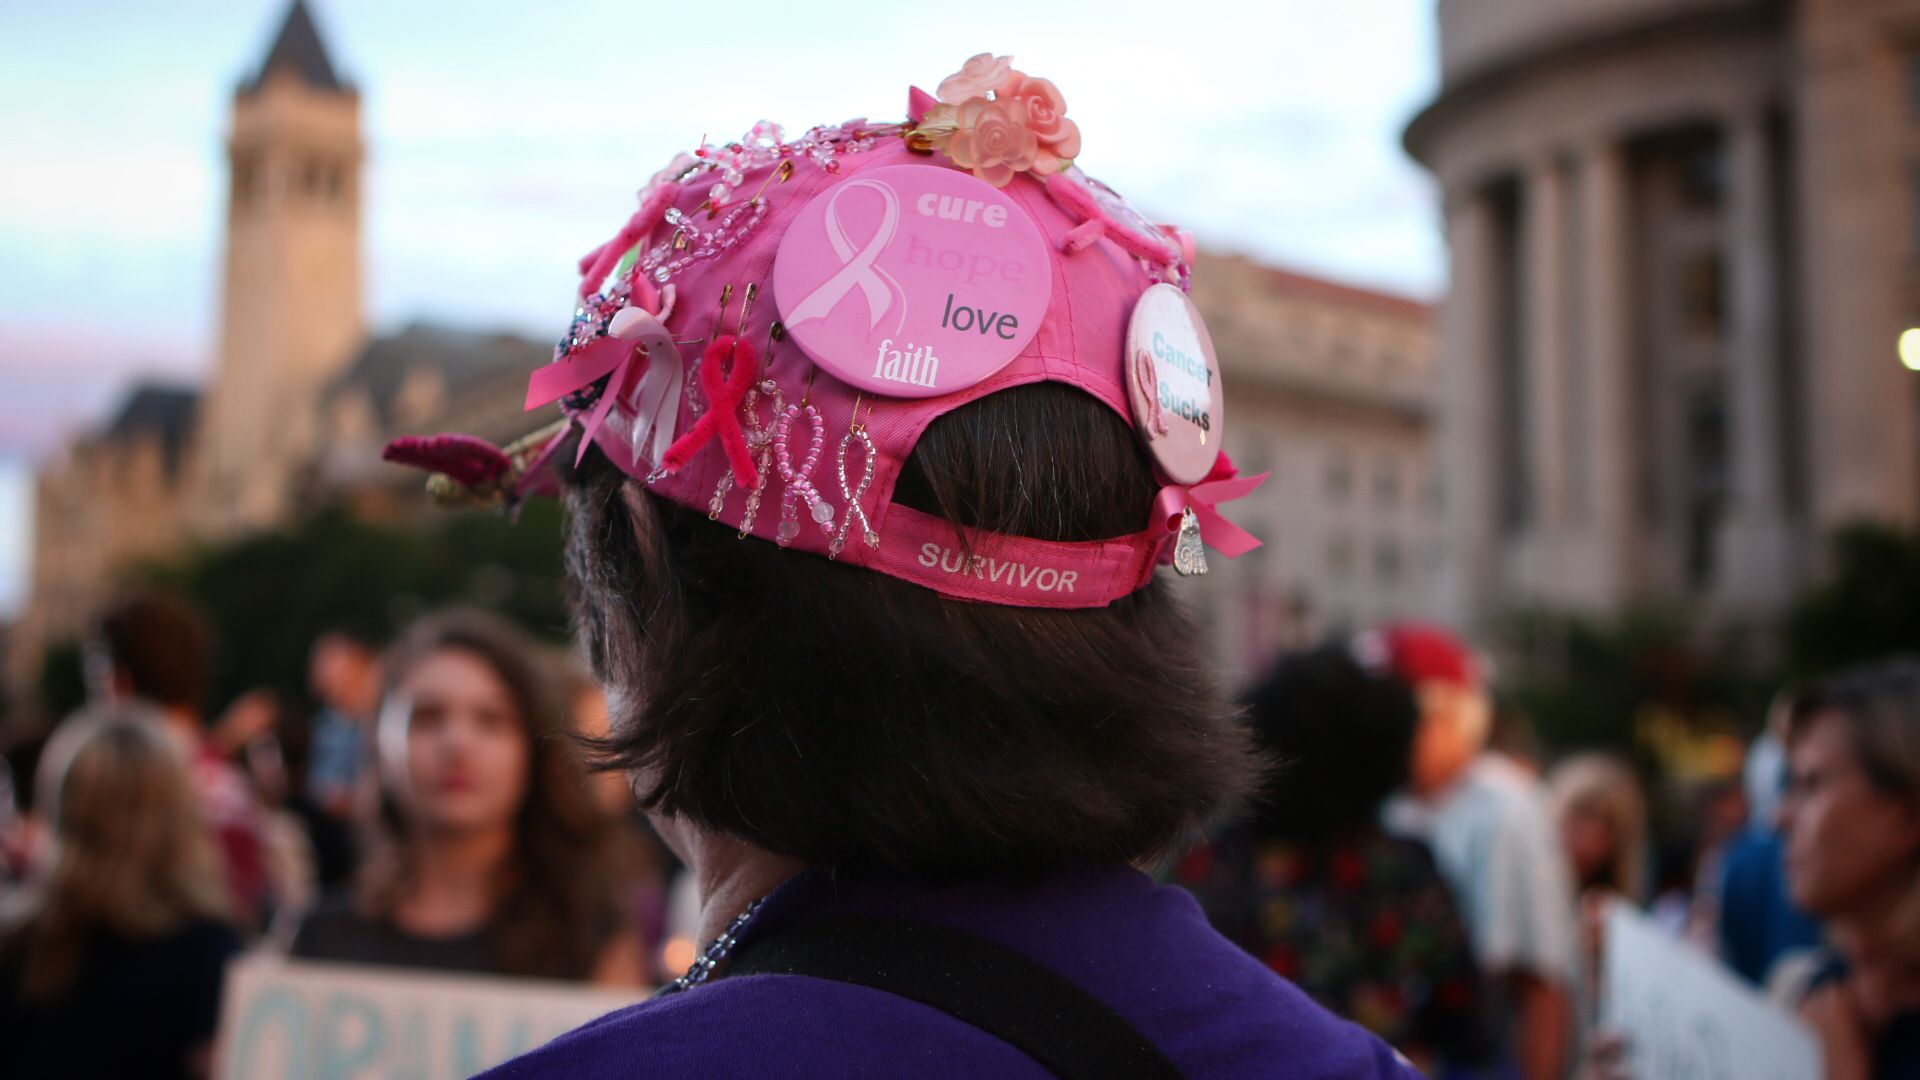 Photo of the back of Helen Webb, who is wearing a pink cap that says "survivor" and has pink breast cancer ribbons attached